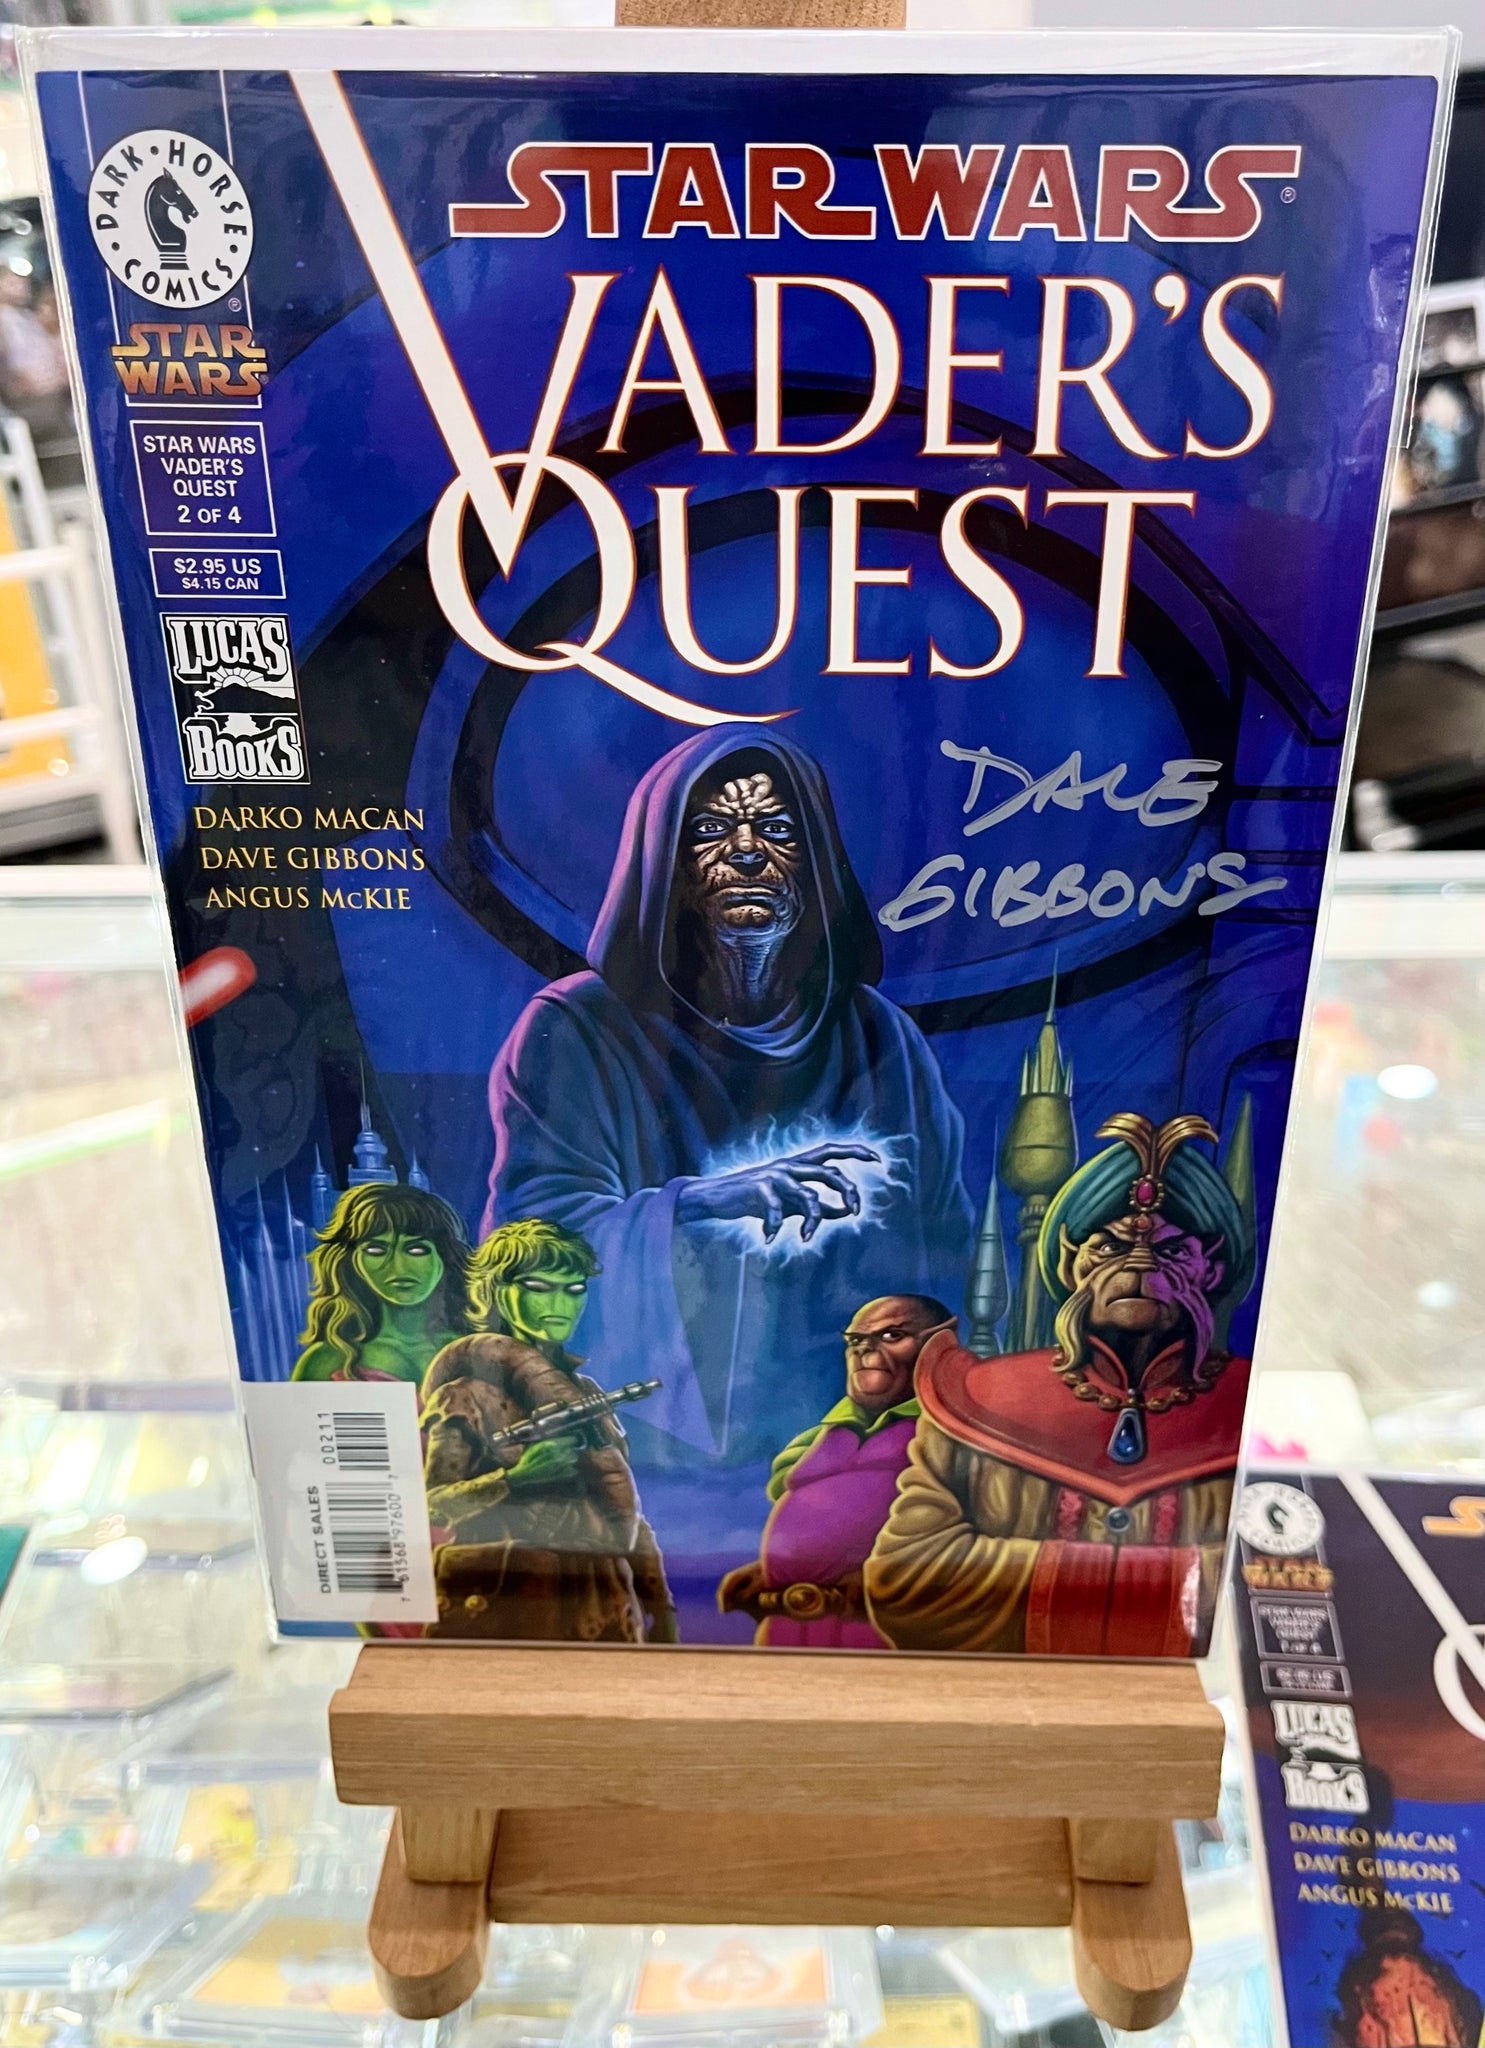 Star Wars Vader’s Quest Dave Gibbons Autographed DC Comics with COA